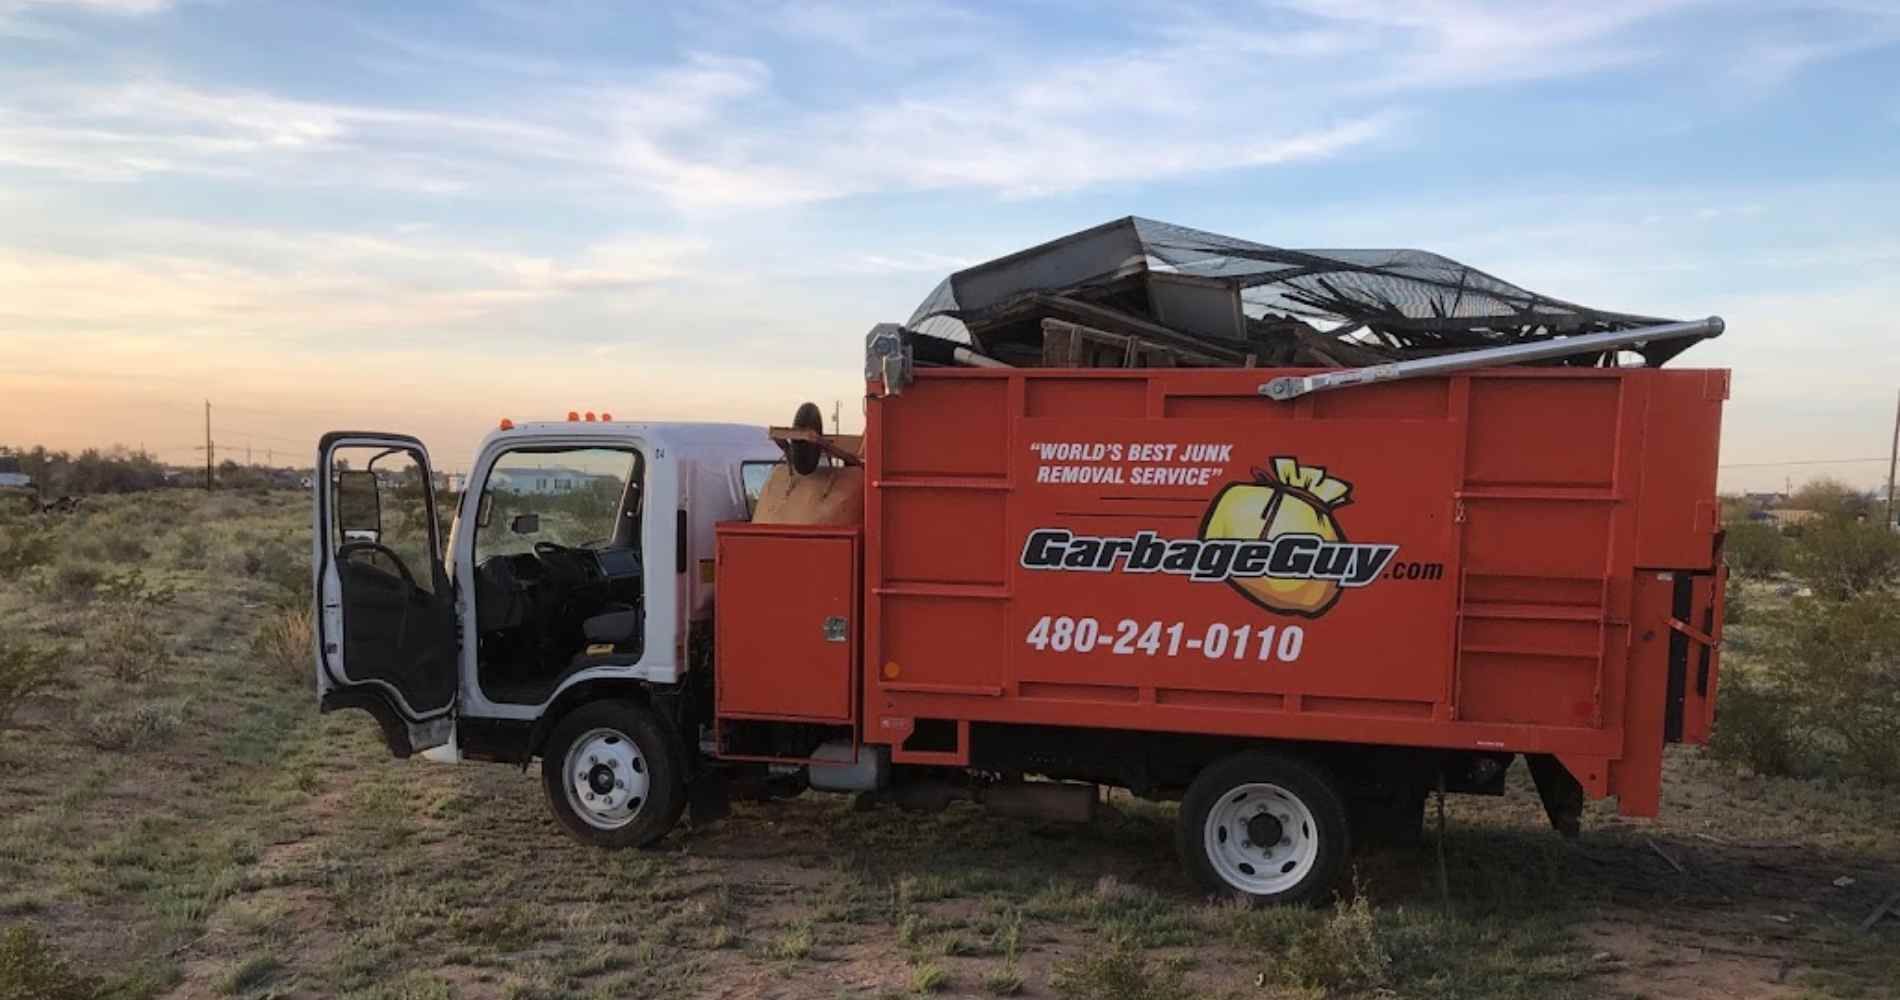 #1 for Junk Removal in Tucson, AZ with Over 1200 5-Star Reviews!